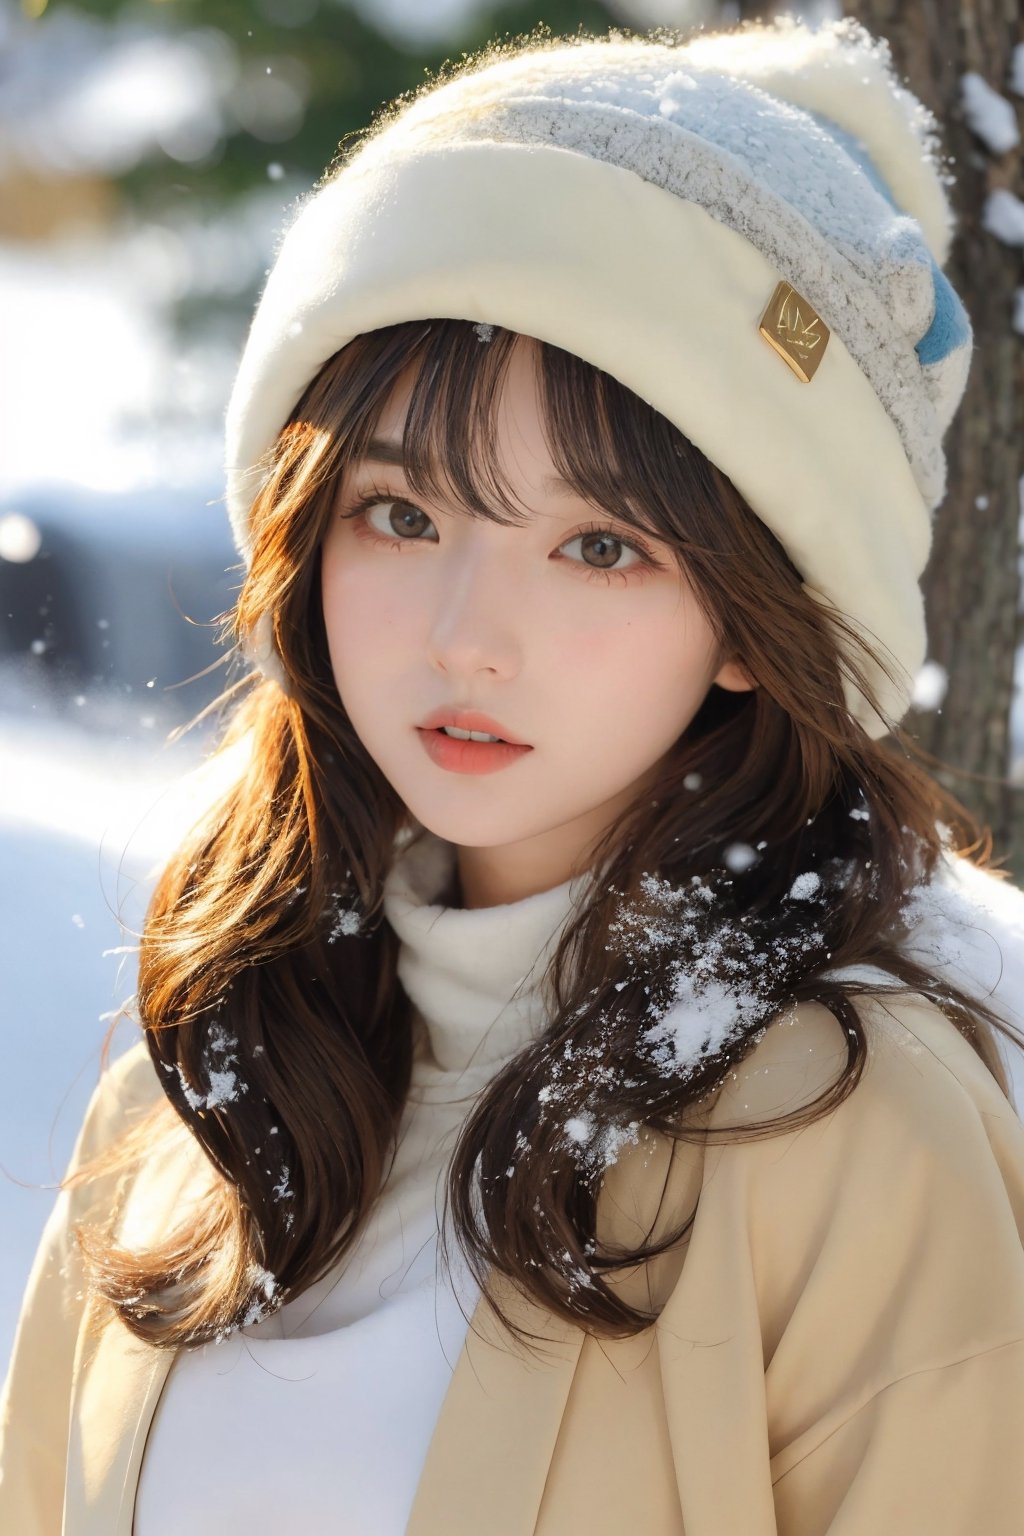 masterpiece, best quality, highly detailed, breasts, photorealistic, dream_girl, ski hat, snow,dreamgirl